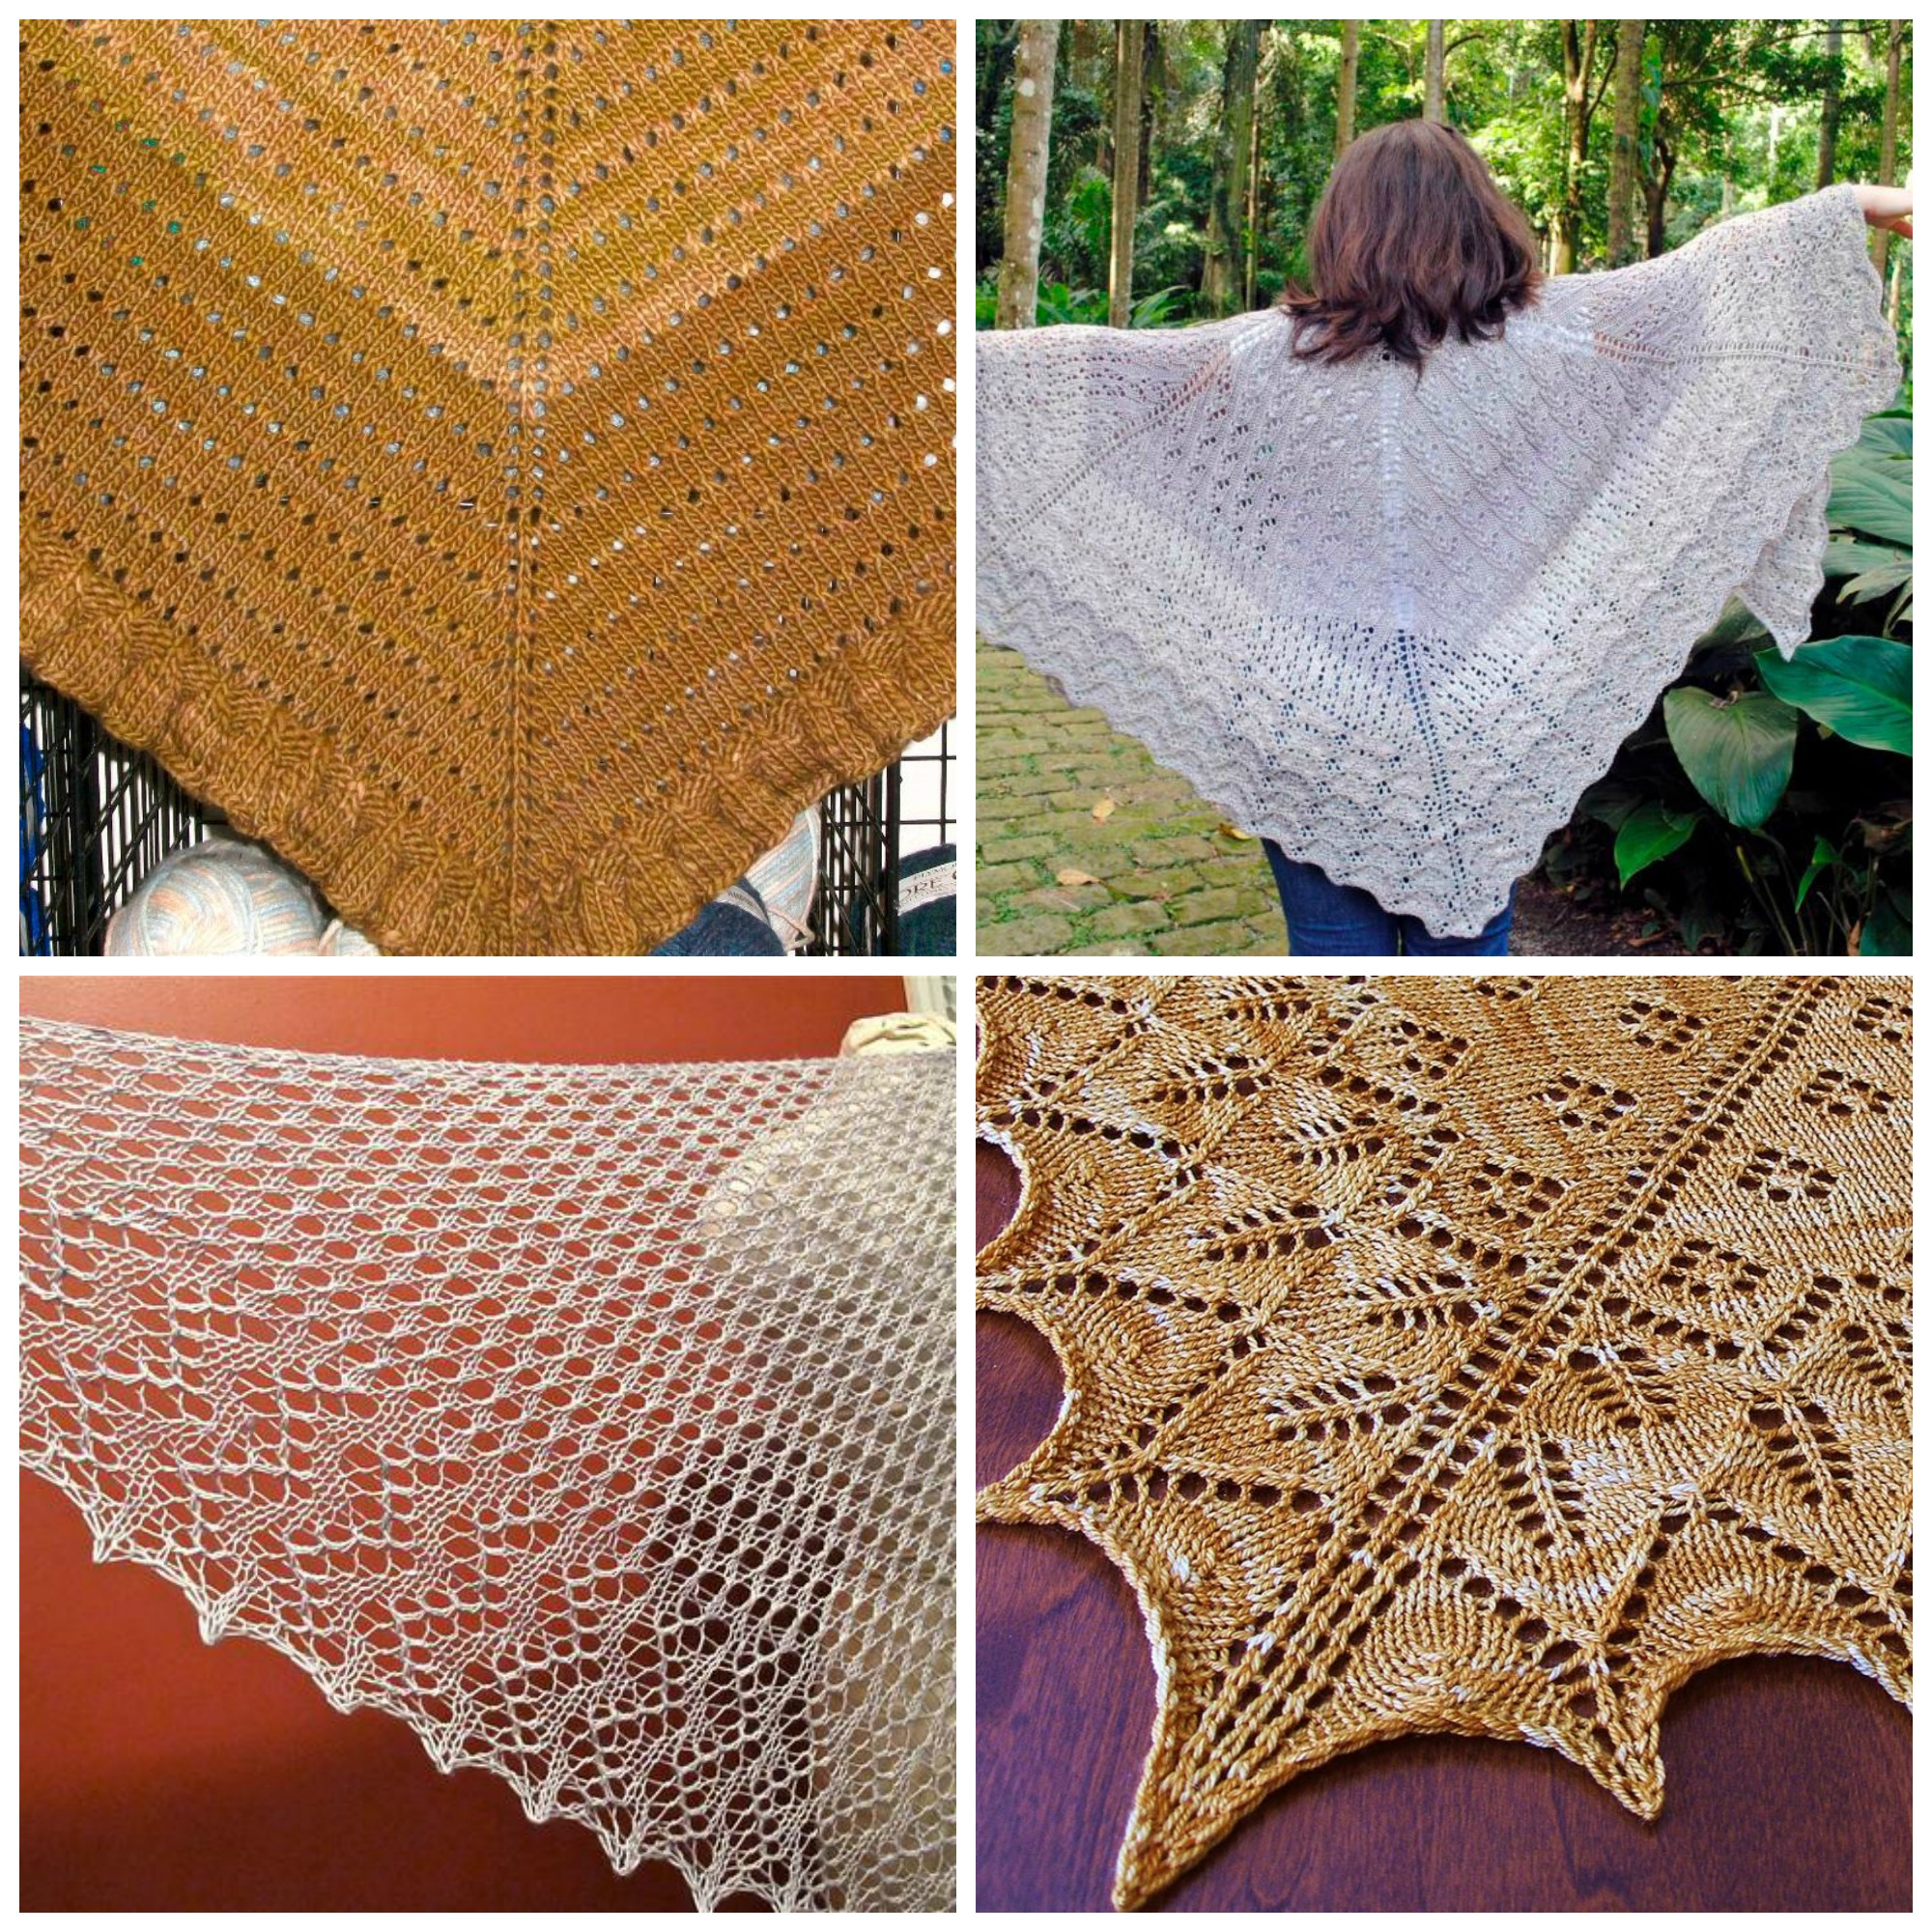 Knitted Shawls Patterns Free 5 Free Knitting Pattern Books With Over 25 Free Patterns